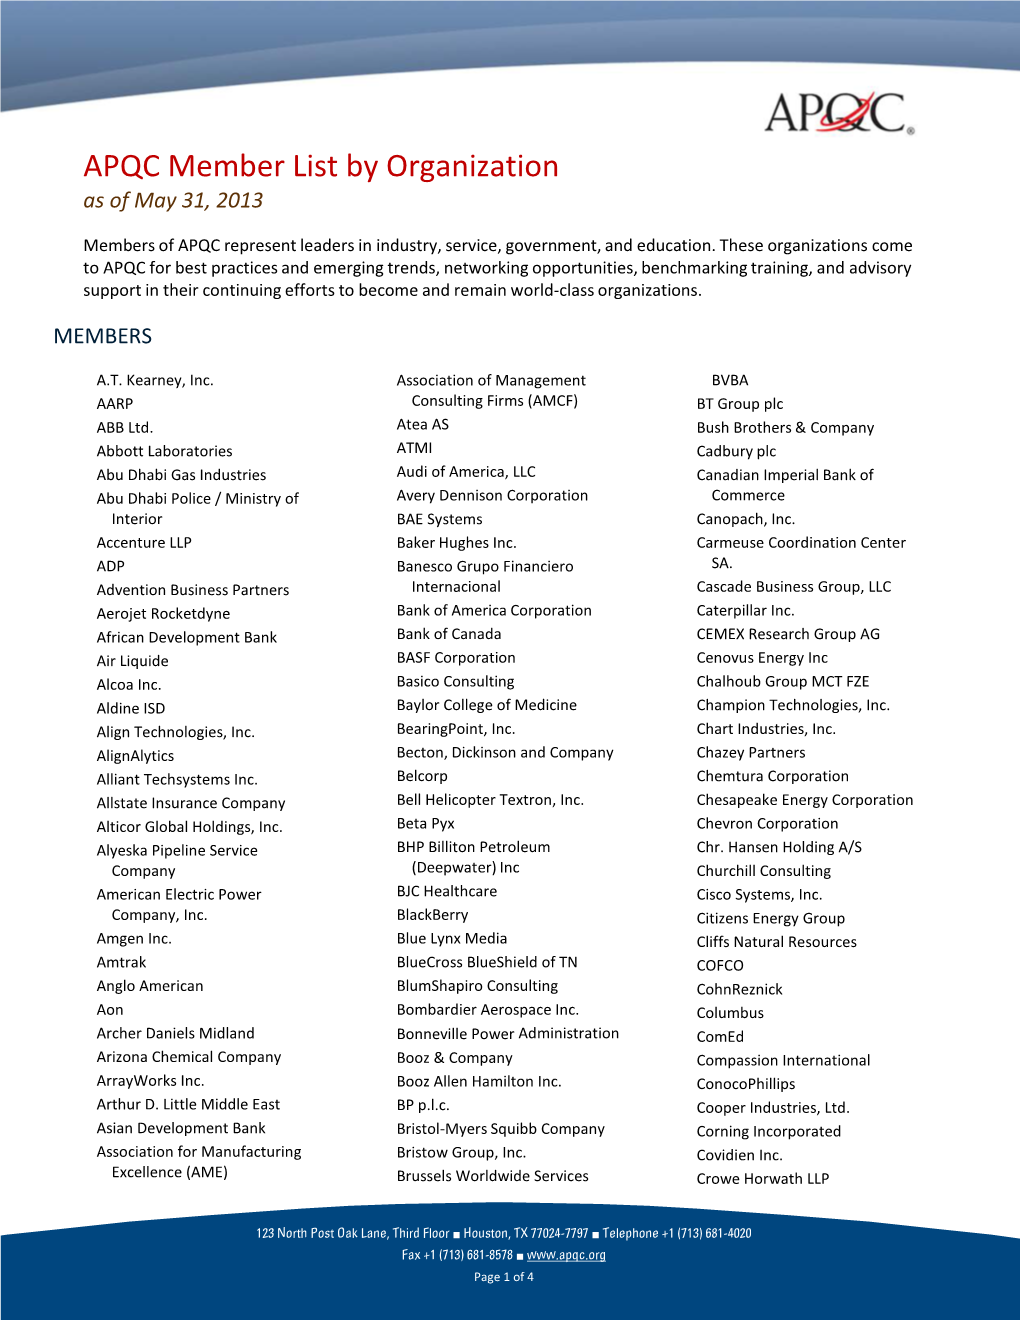 APQC Member List by Organization As of May 31, 2013